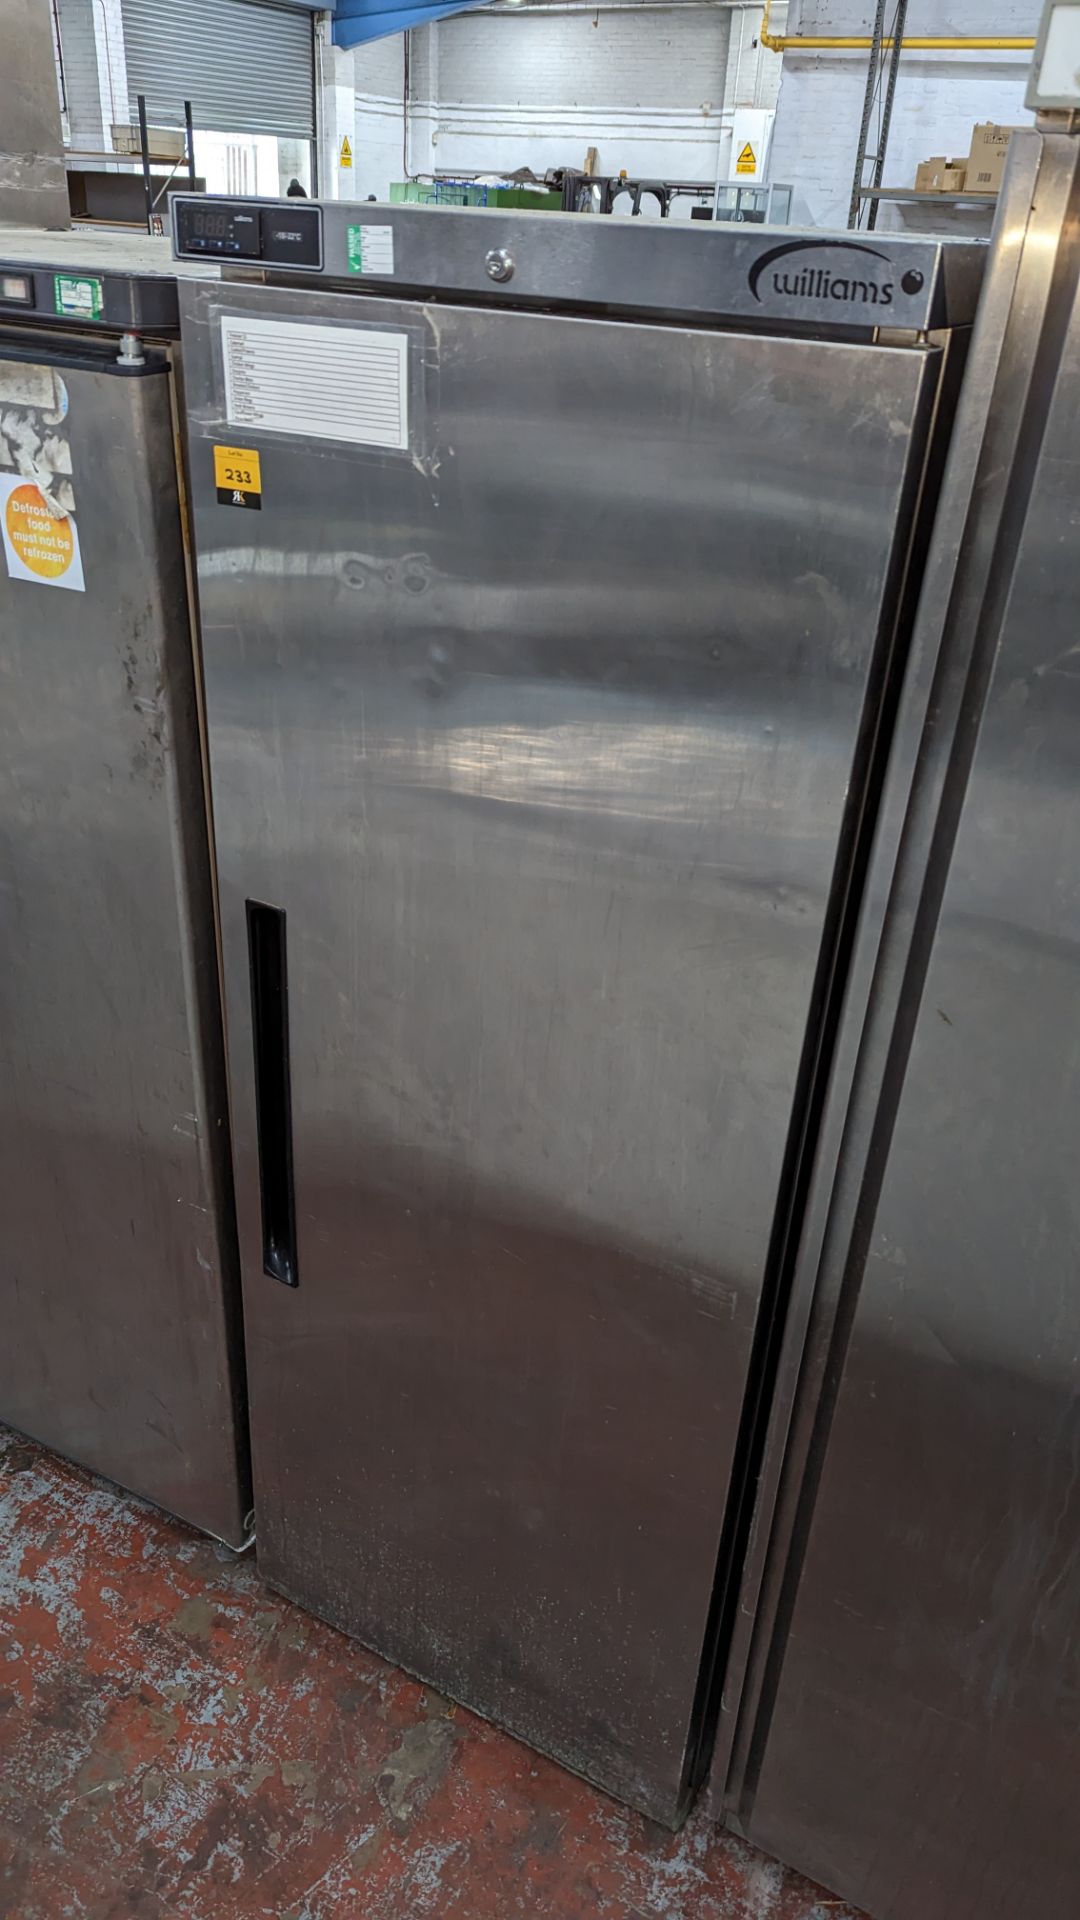 Williams stainless steel commercial tall freezer - Image 2 of 4